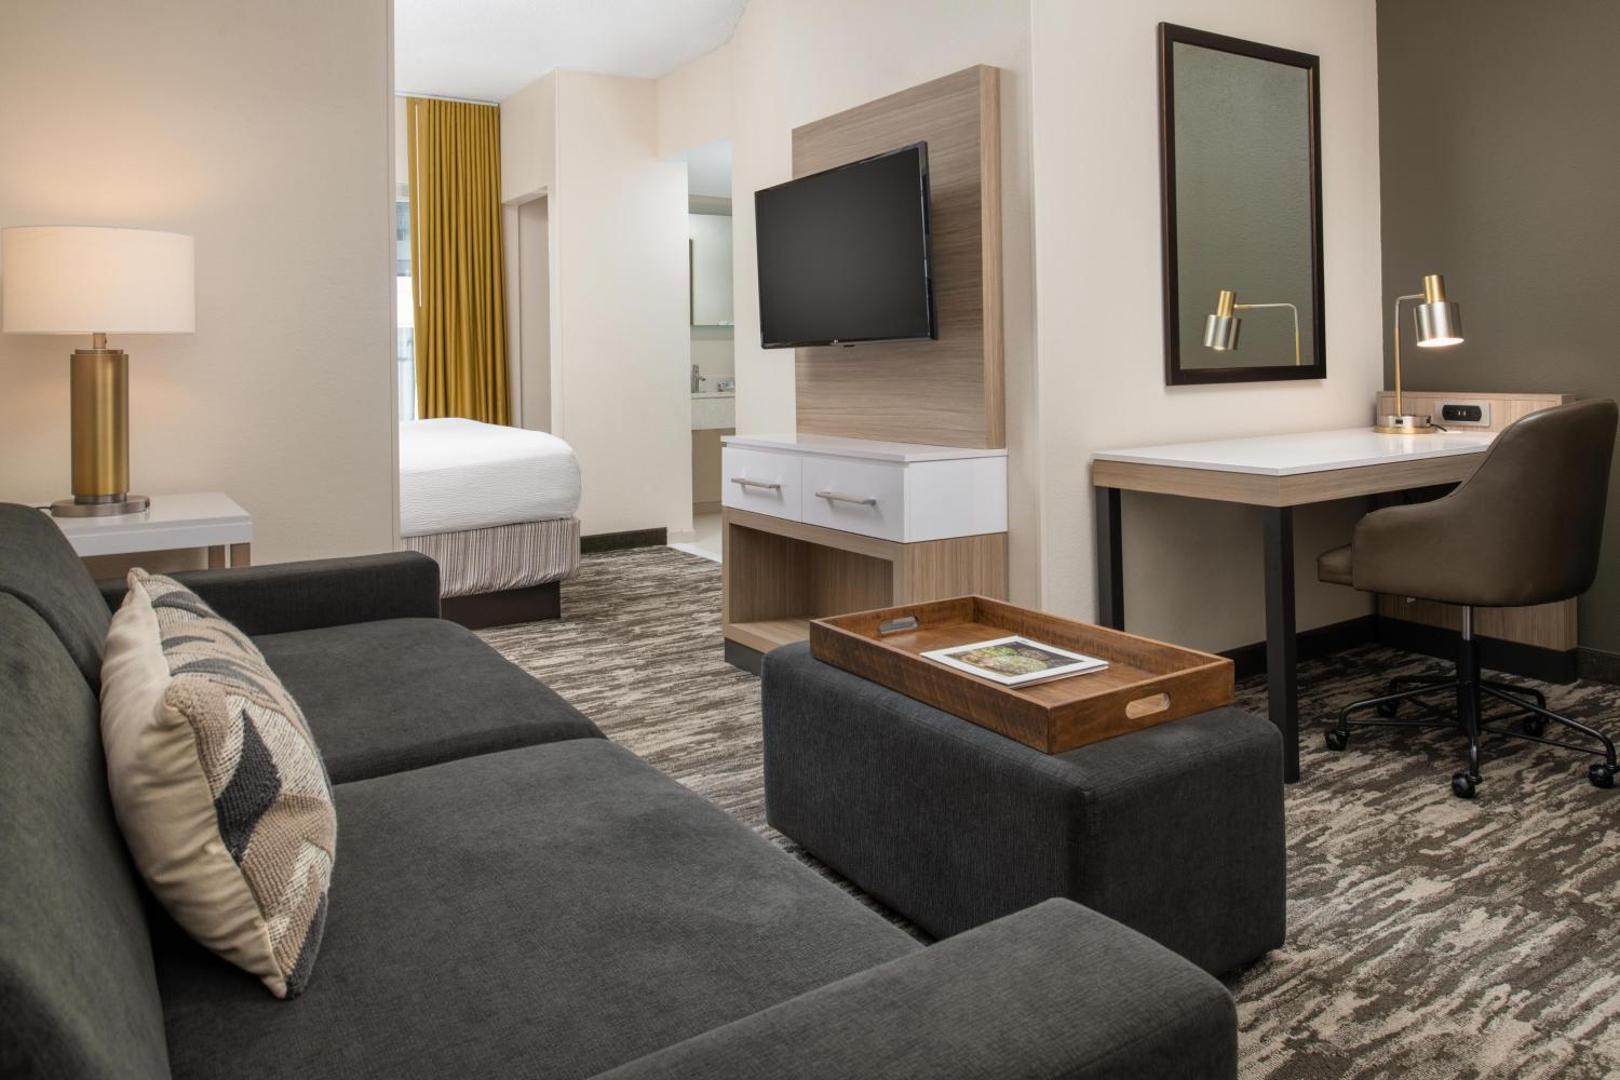 SpringHill Suites Seattle Downtown/South Lake Union